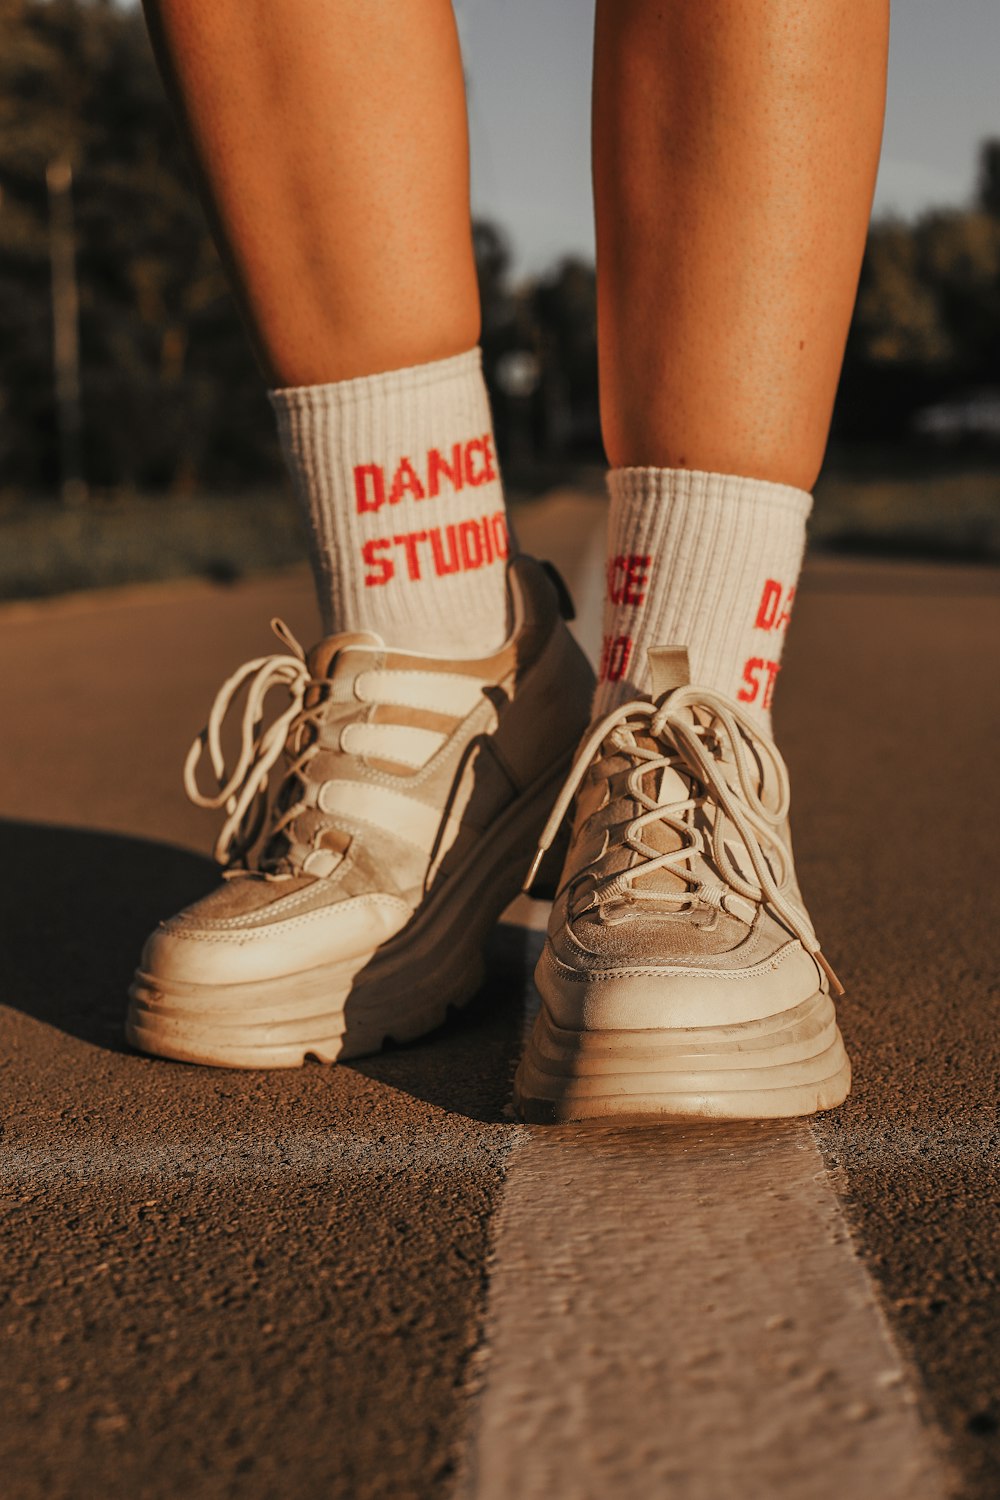 Person wearing white and red socks and white adidas sneakers photo – Free  Clothing Image on Unsplash